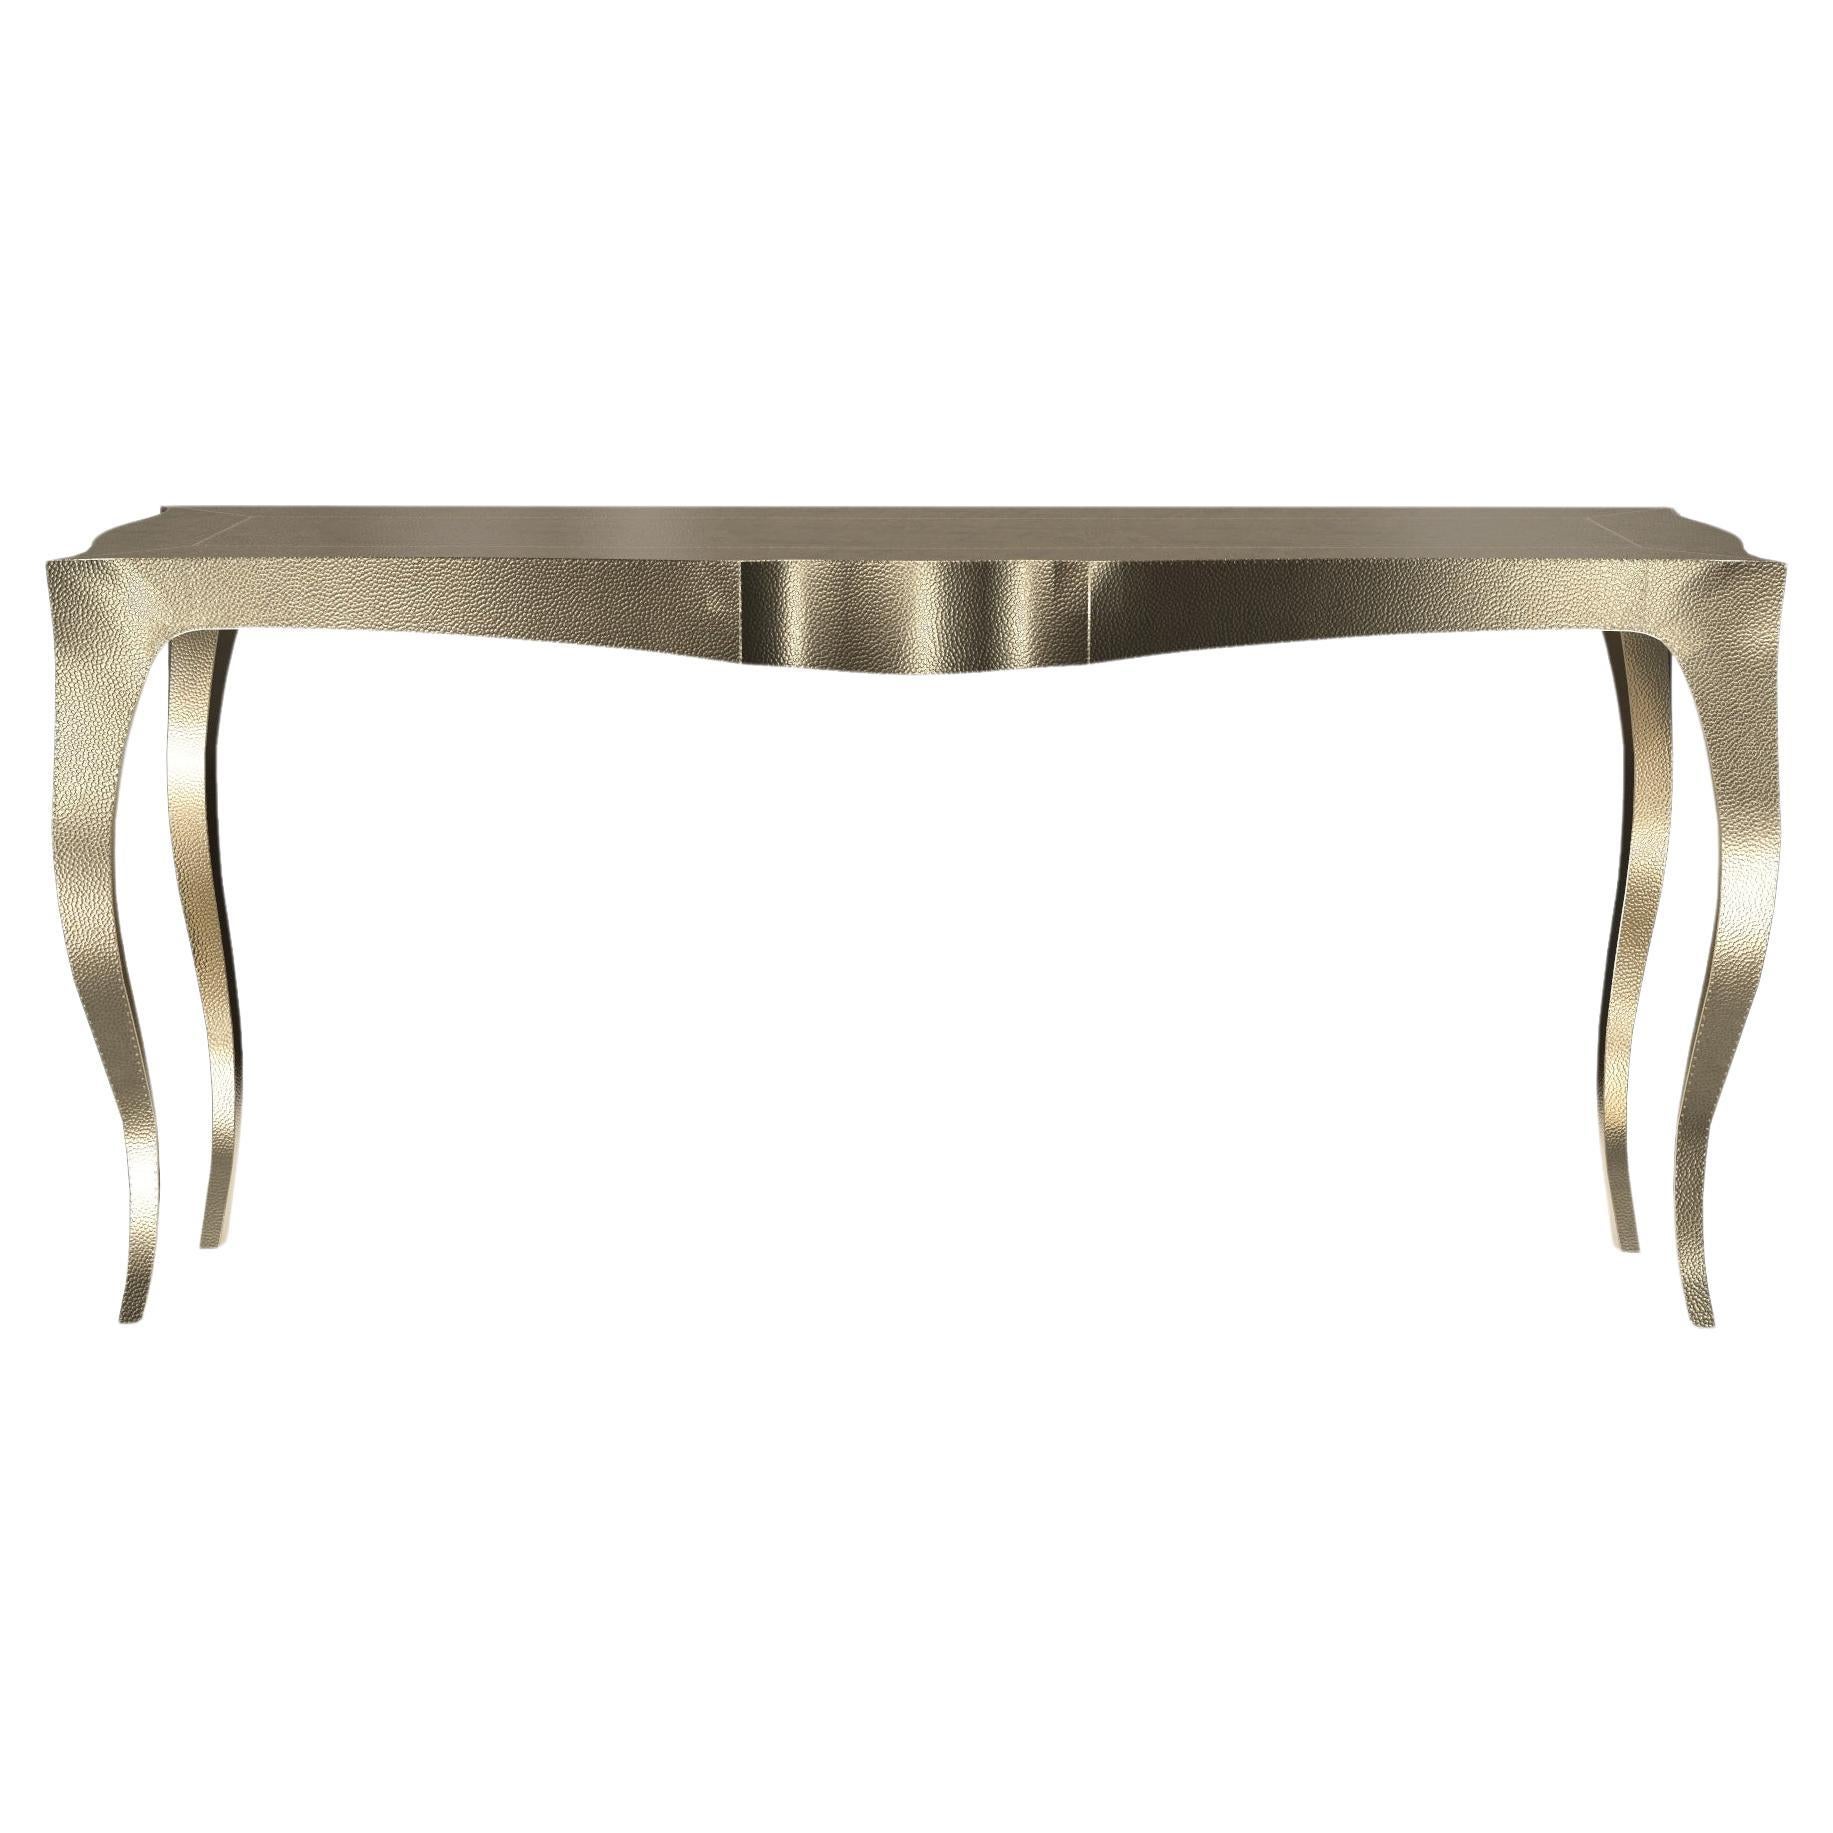 Louise Console Art Nouveau Tray Tables Mid. Hammered Brass by Paul Mathieu